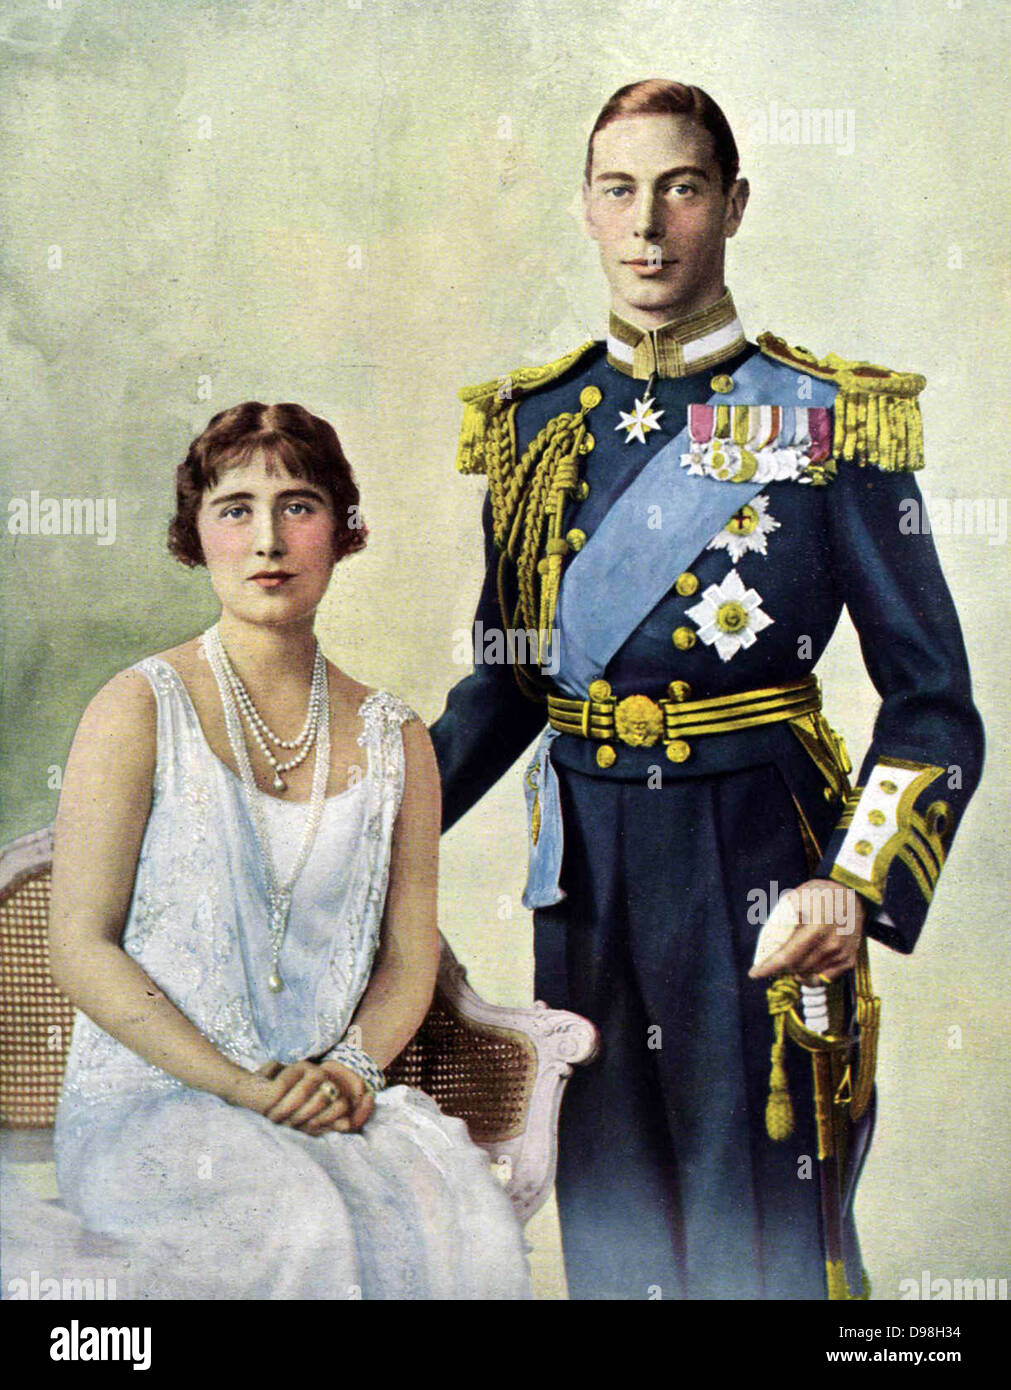 King George VI and Queen Elizabeth of Great Britain. Reigned 1936-1952 Stock Photo